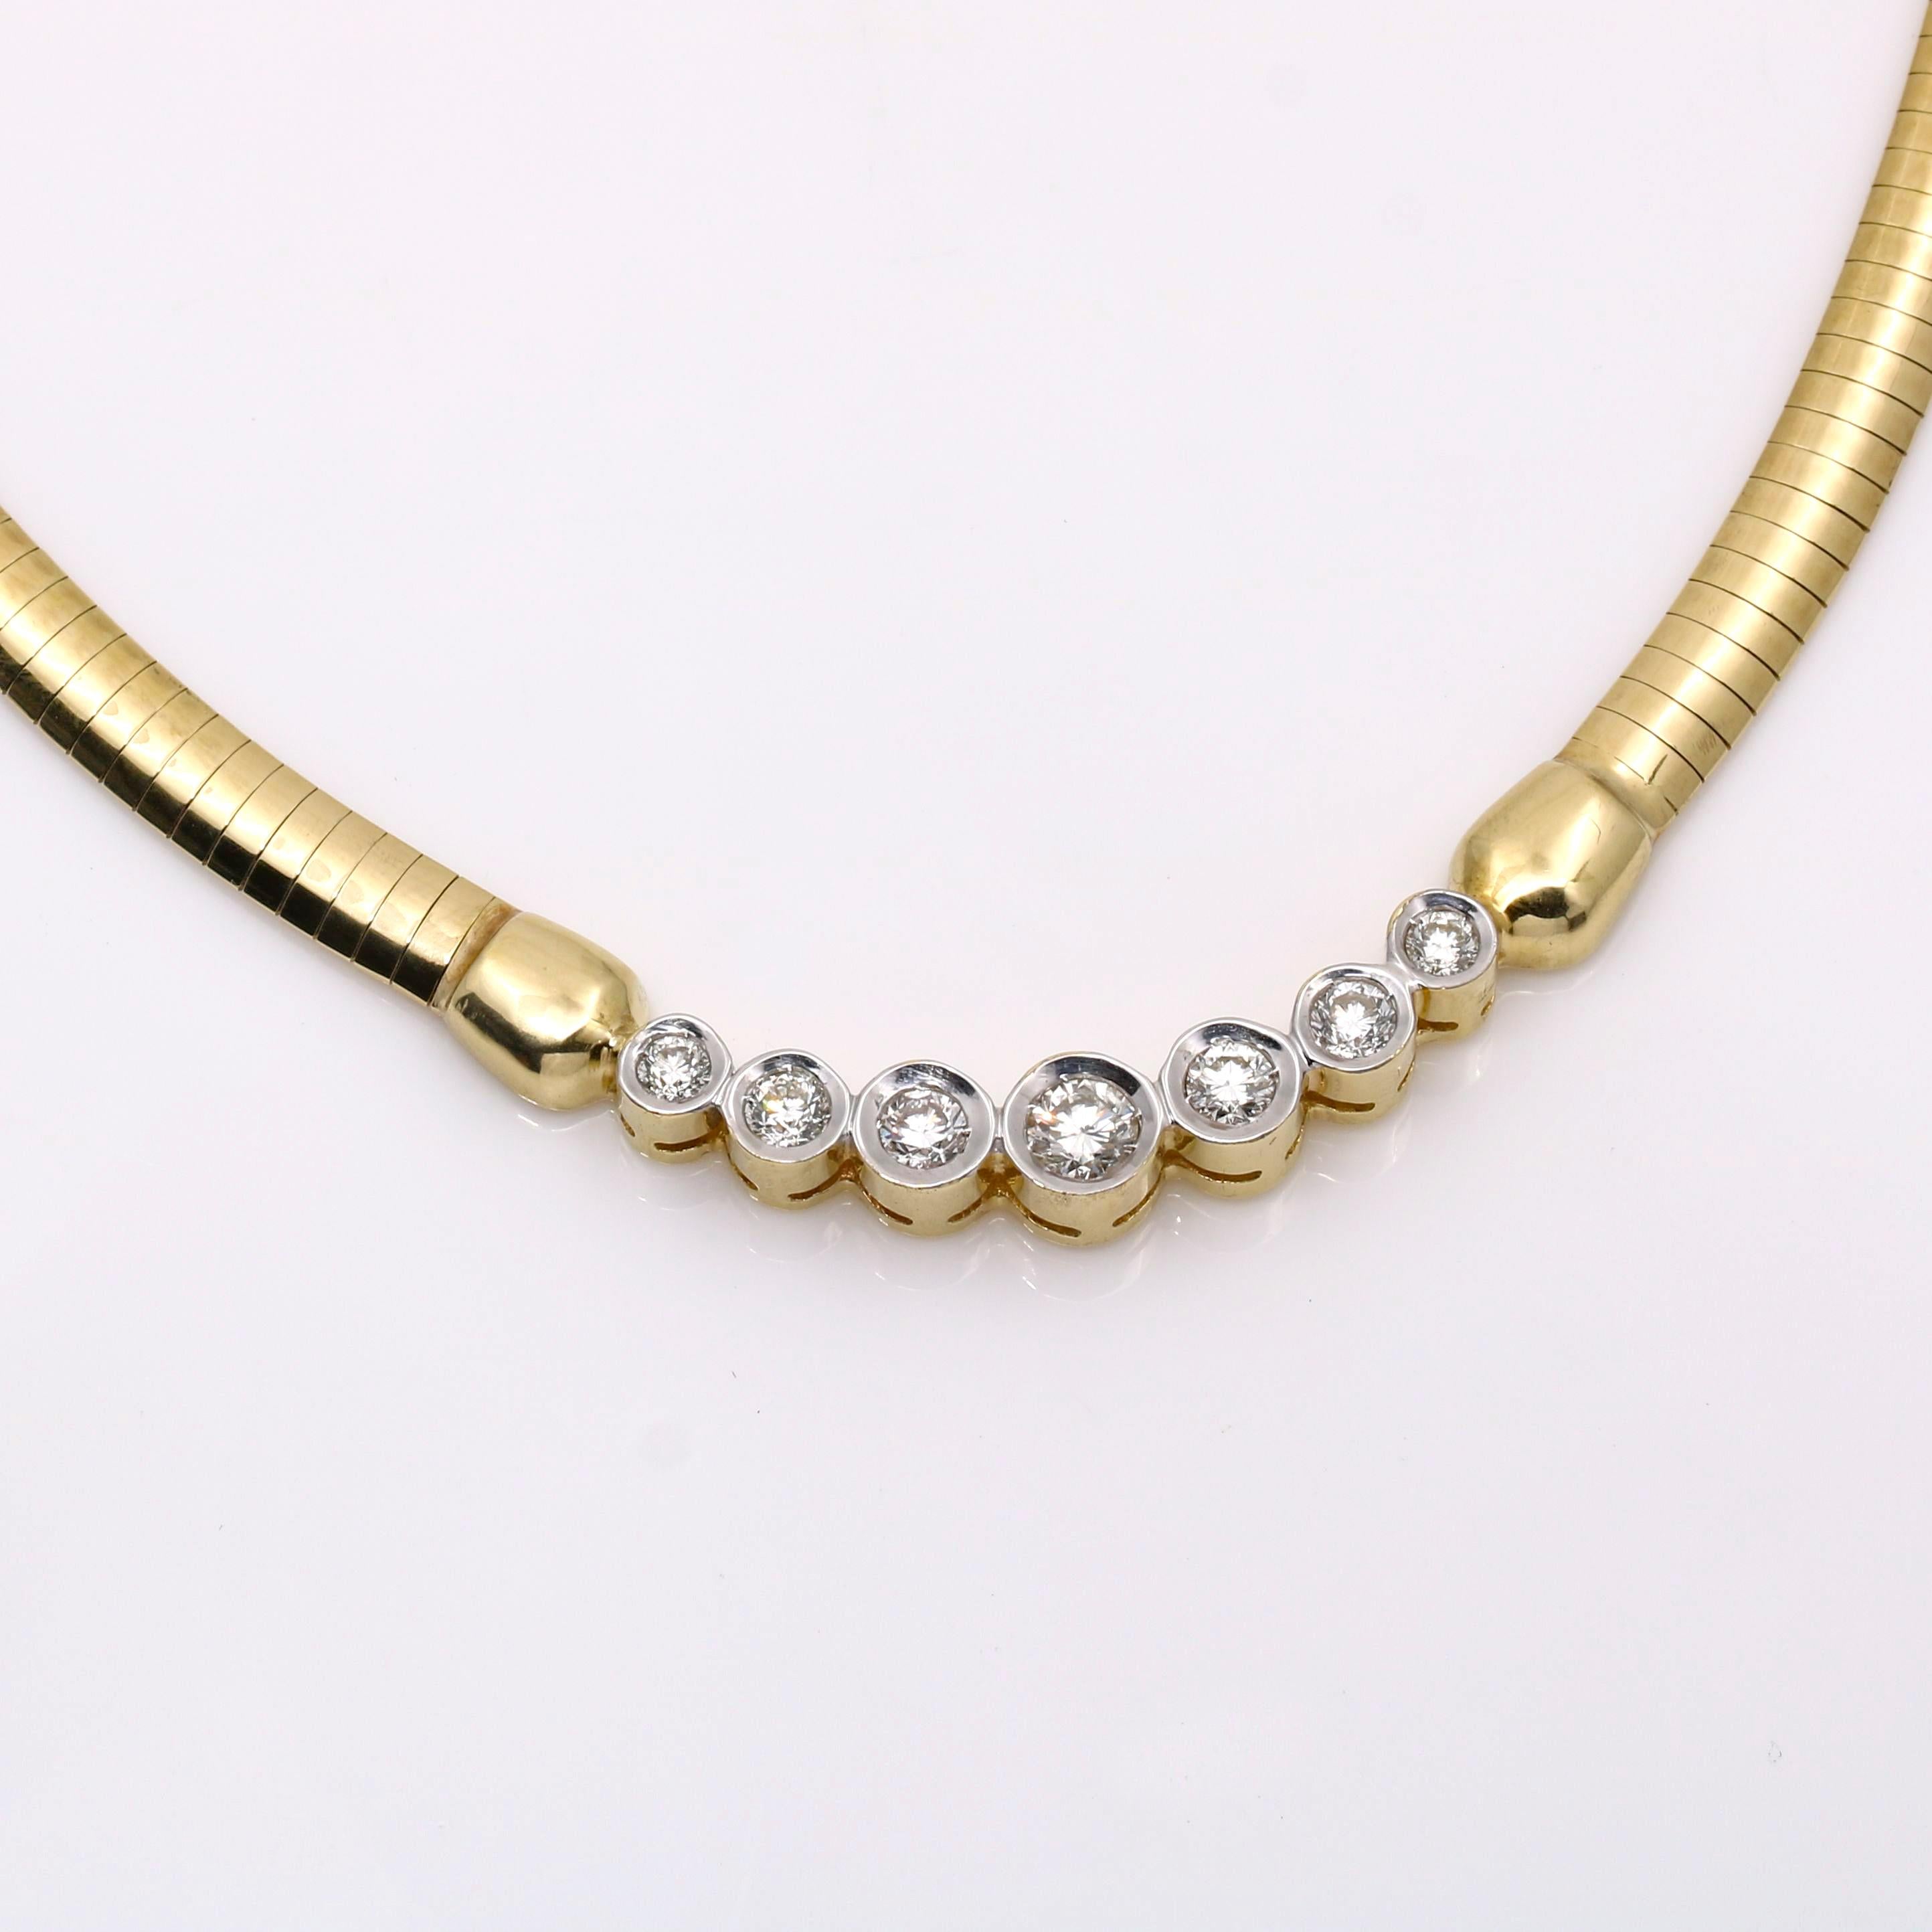 This diamond necklace is a combination of elegance and beauty. The yellow gold omega chain and the beautiful 7 graduated high-quality diamonds are perfectly combined to make a stunning piece that will make you shine like a diamond. It is in